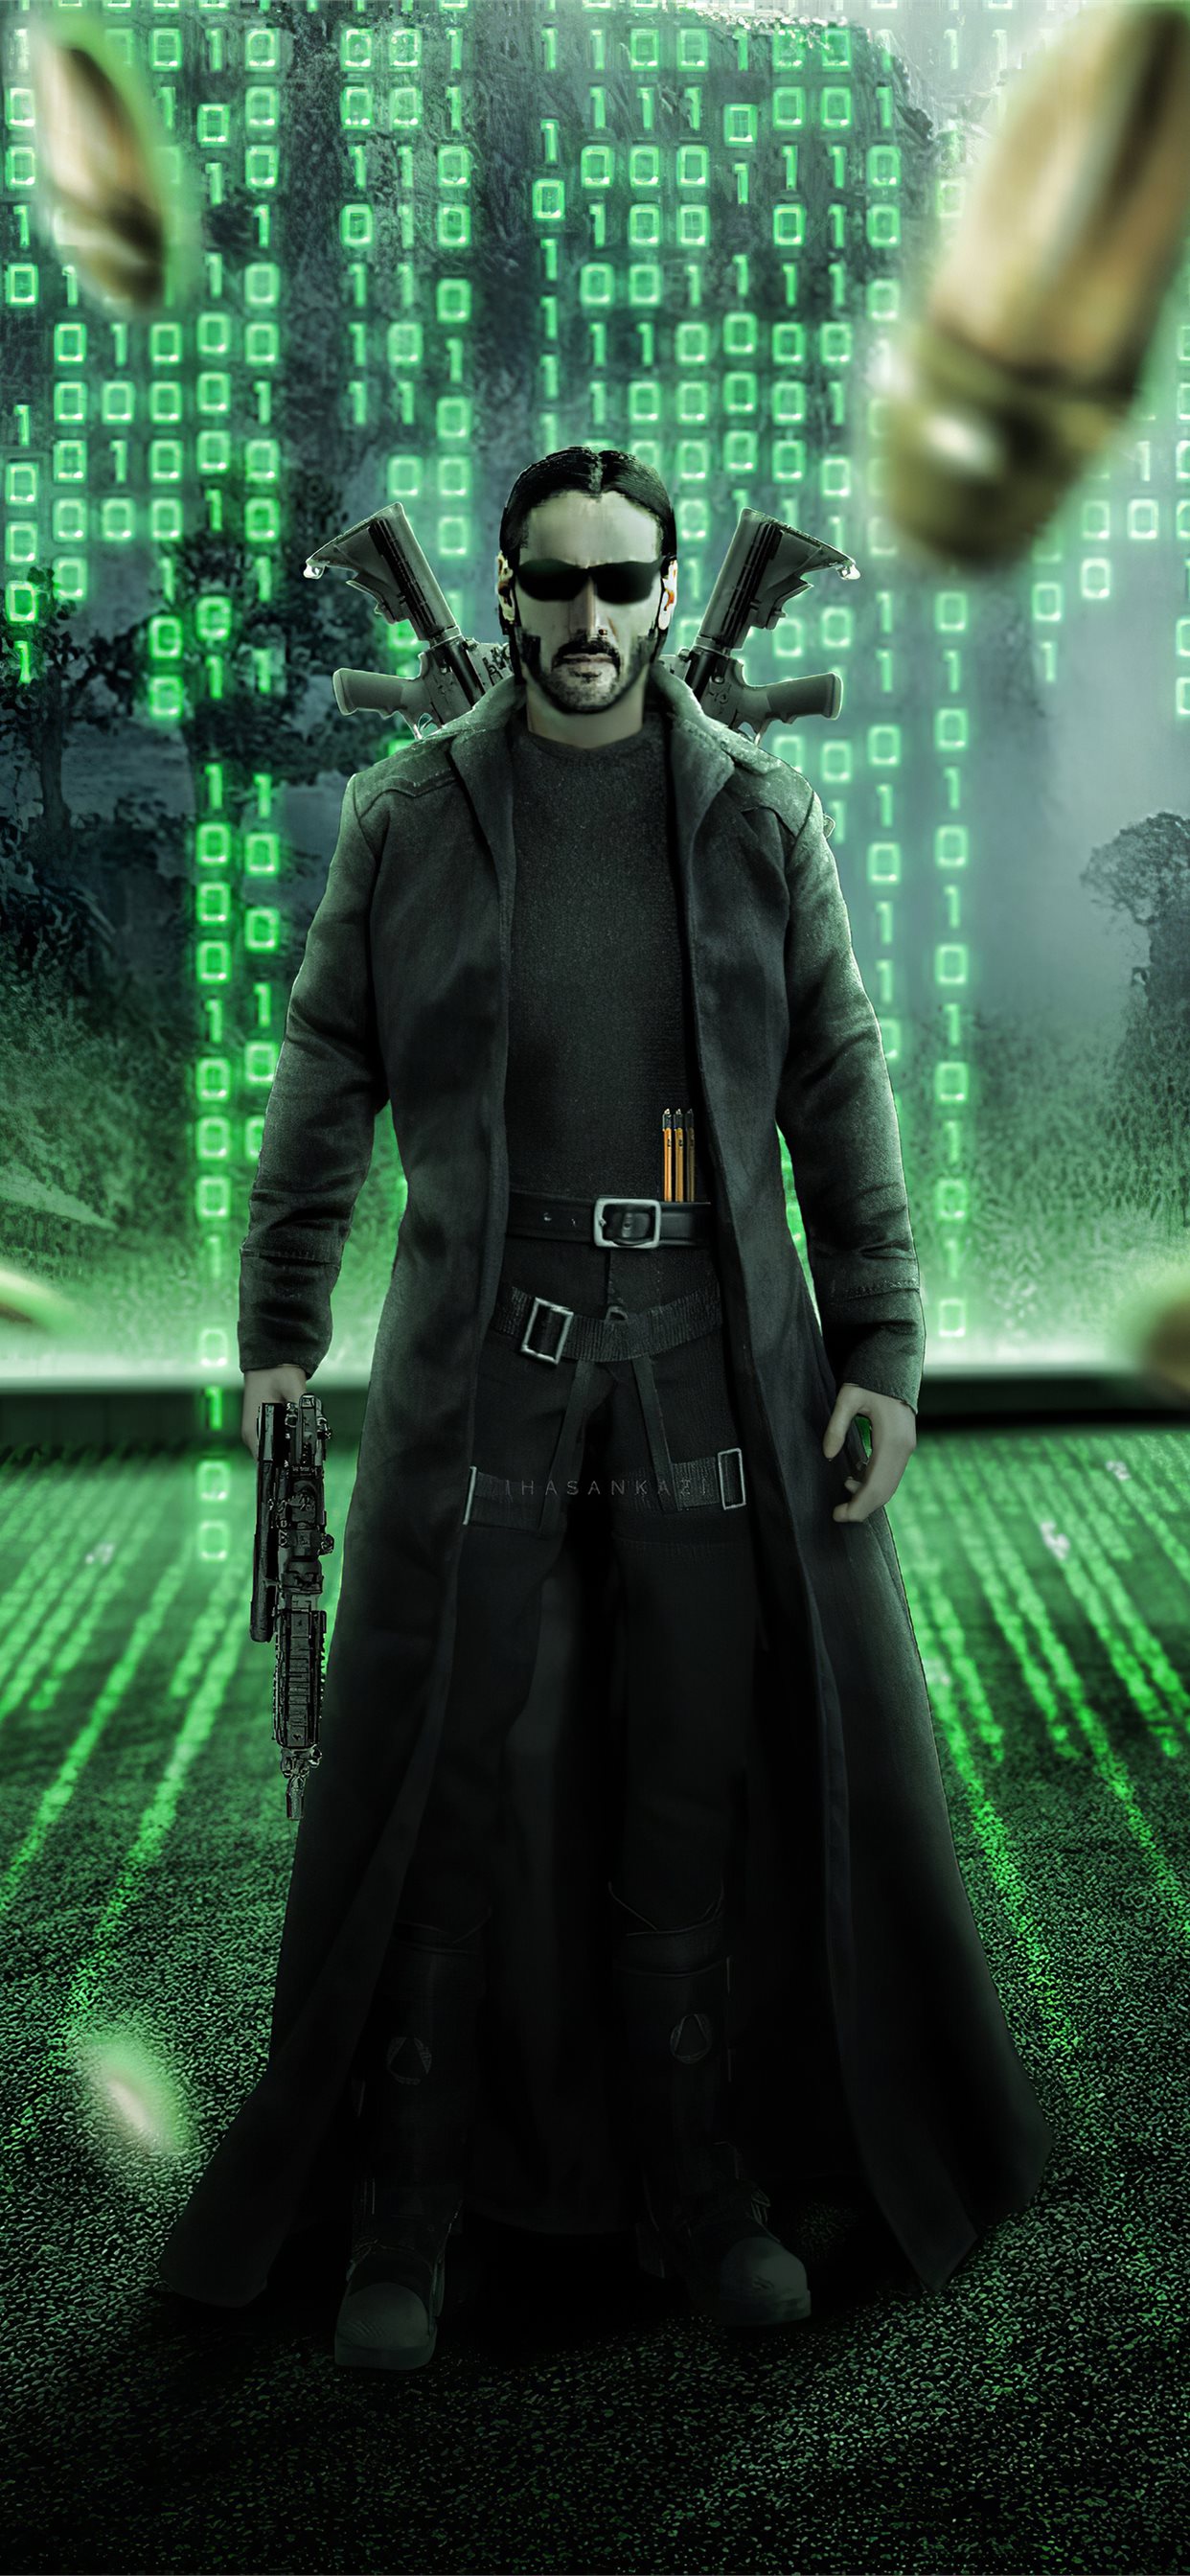 The matrix neo is back iphone wallpapers free download